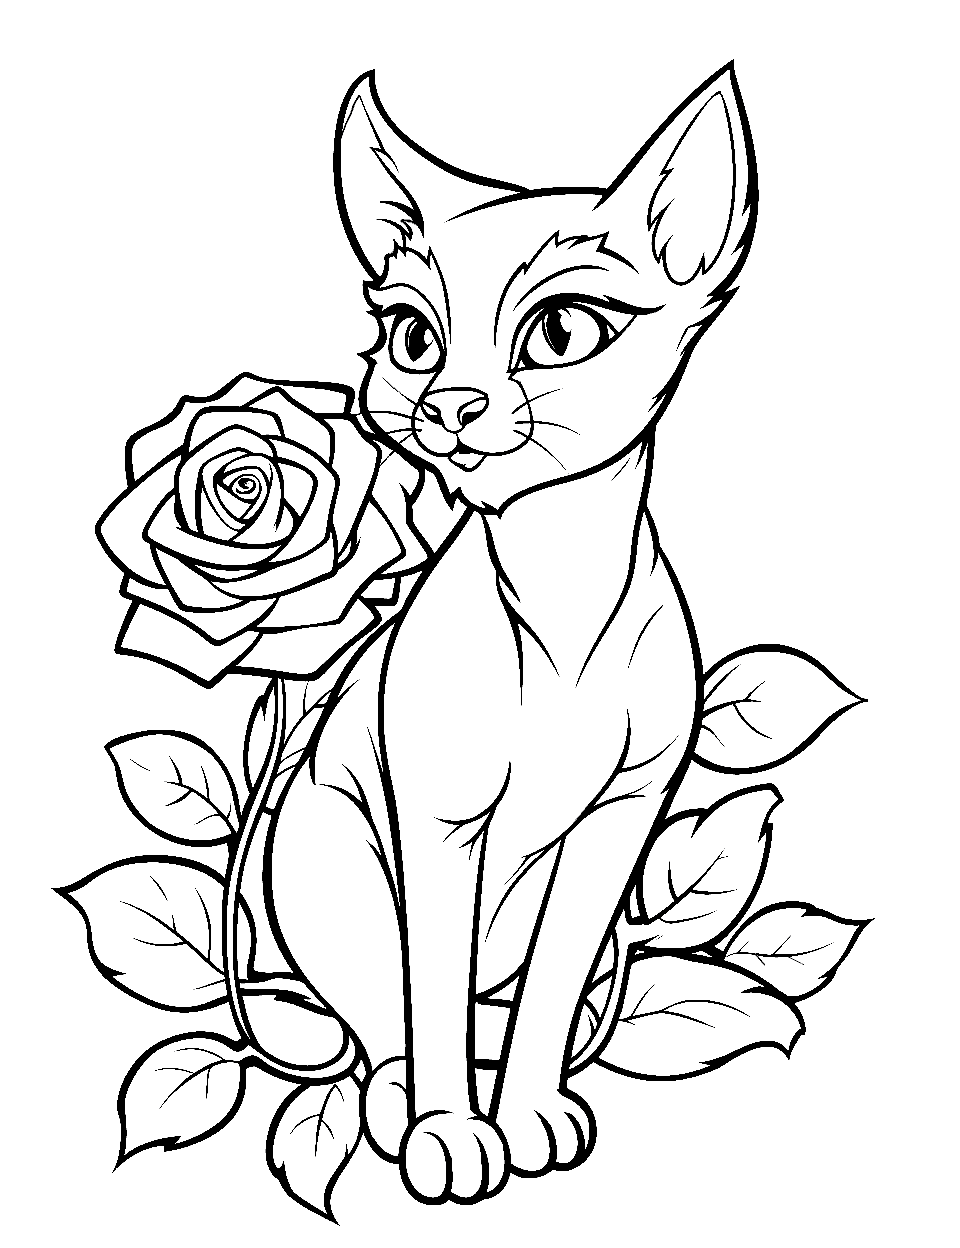 Cool Cat Beside a Rose Coloring Page - A cool-looking cat lounging next to a rose.